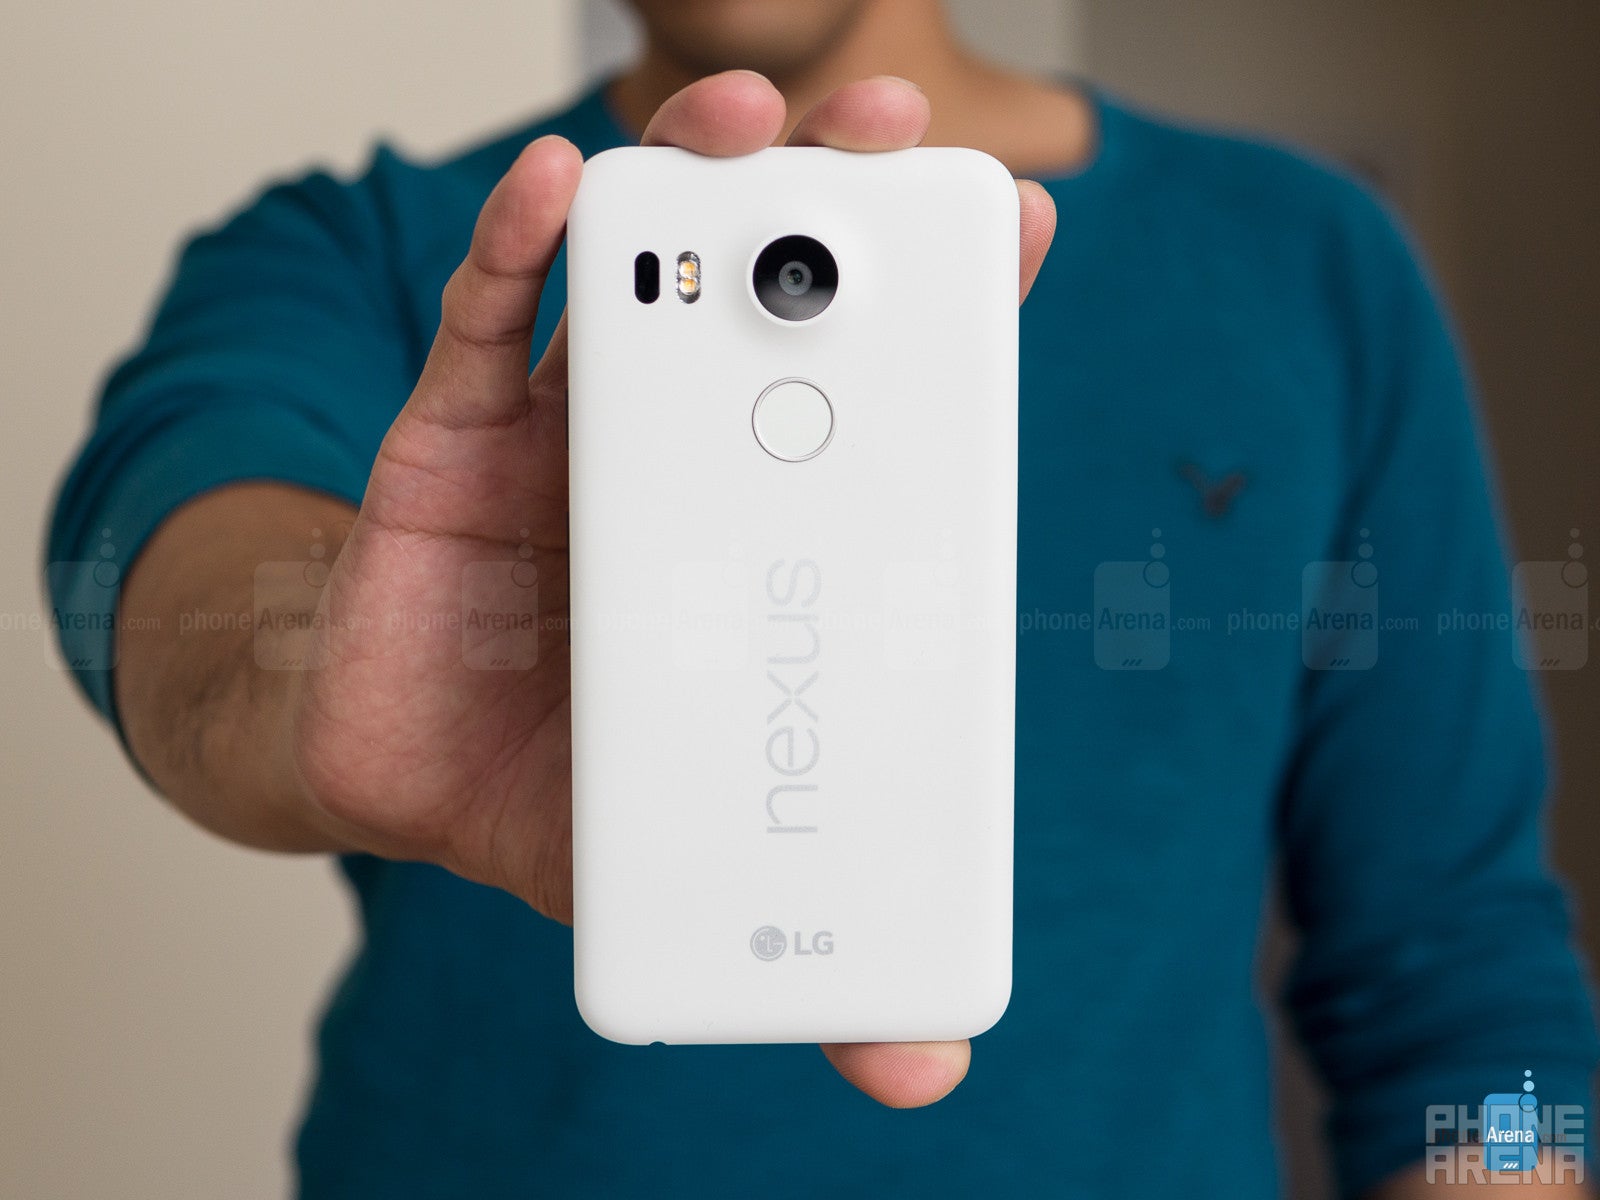 Quick, the Google Nexus 5X is discounted to $234.99 on Newegg, save 33%